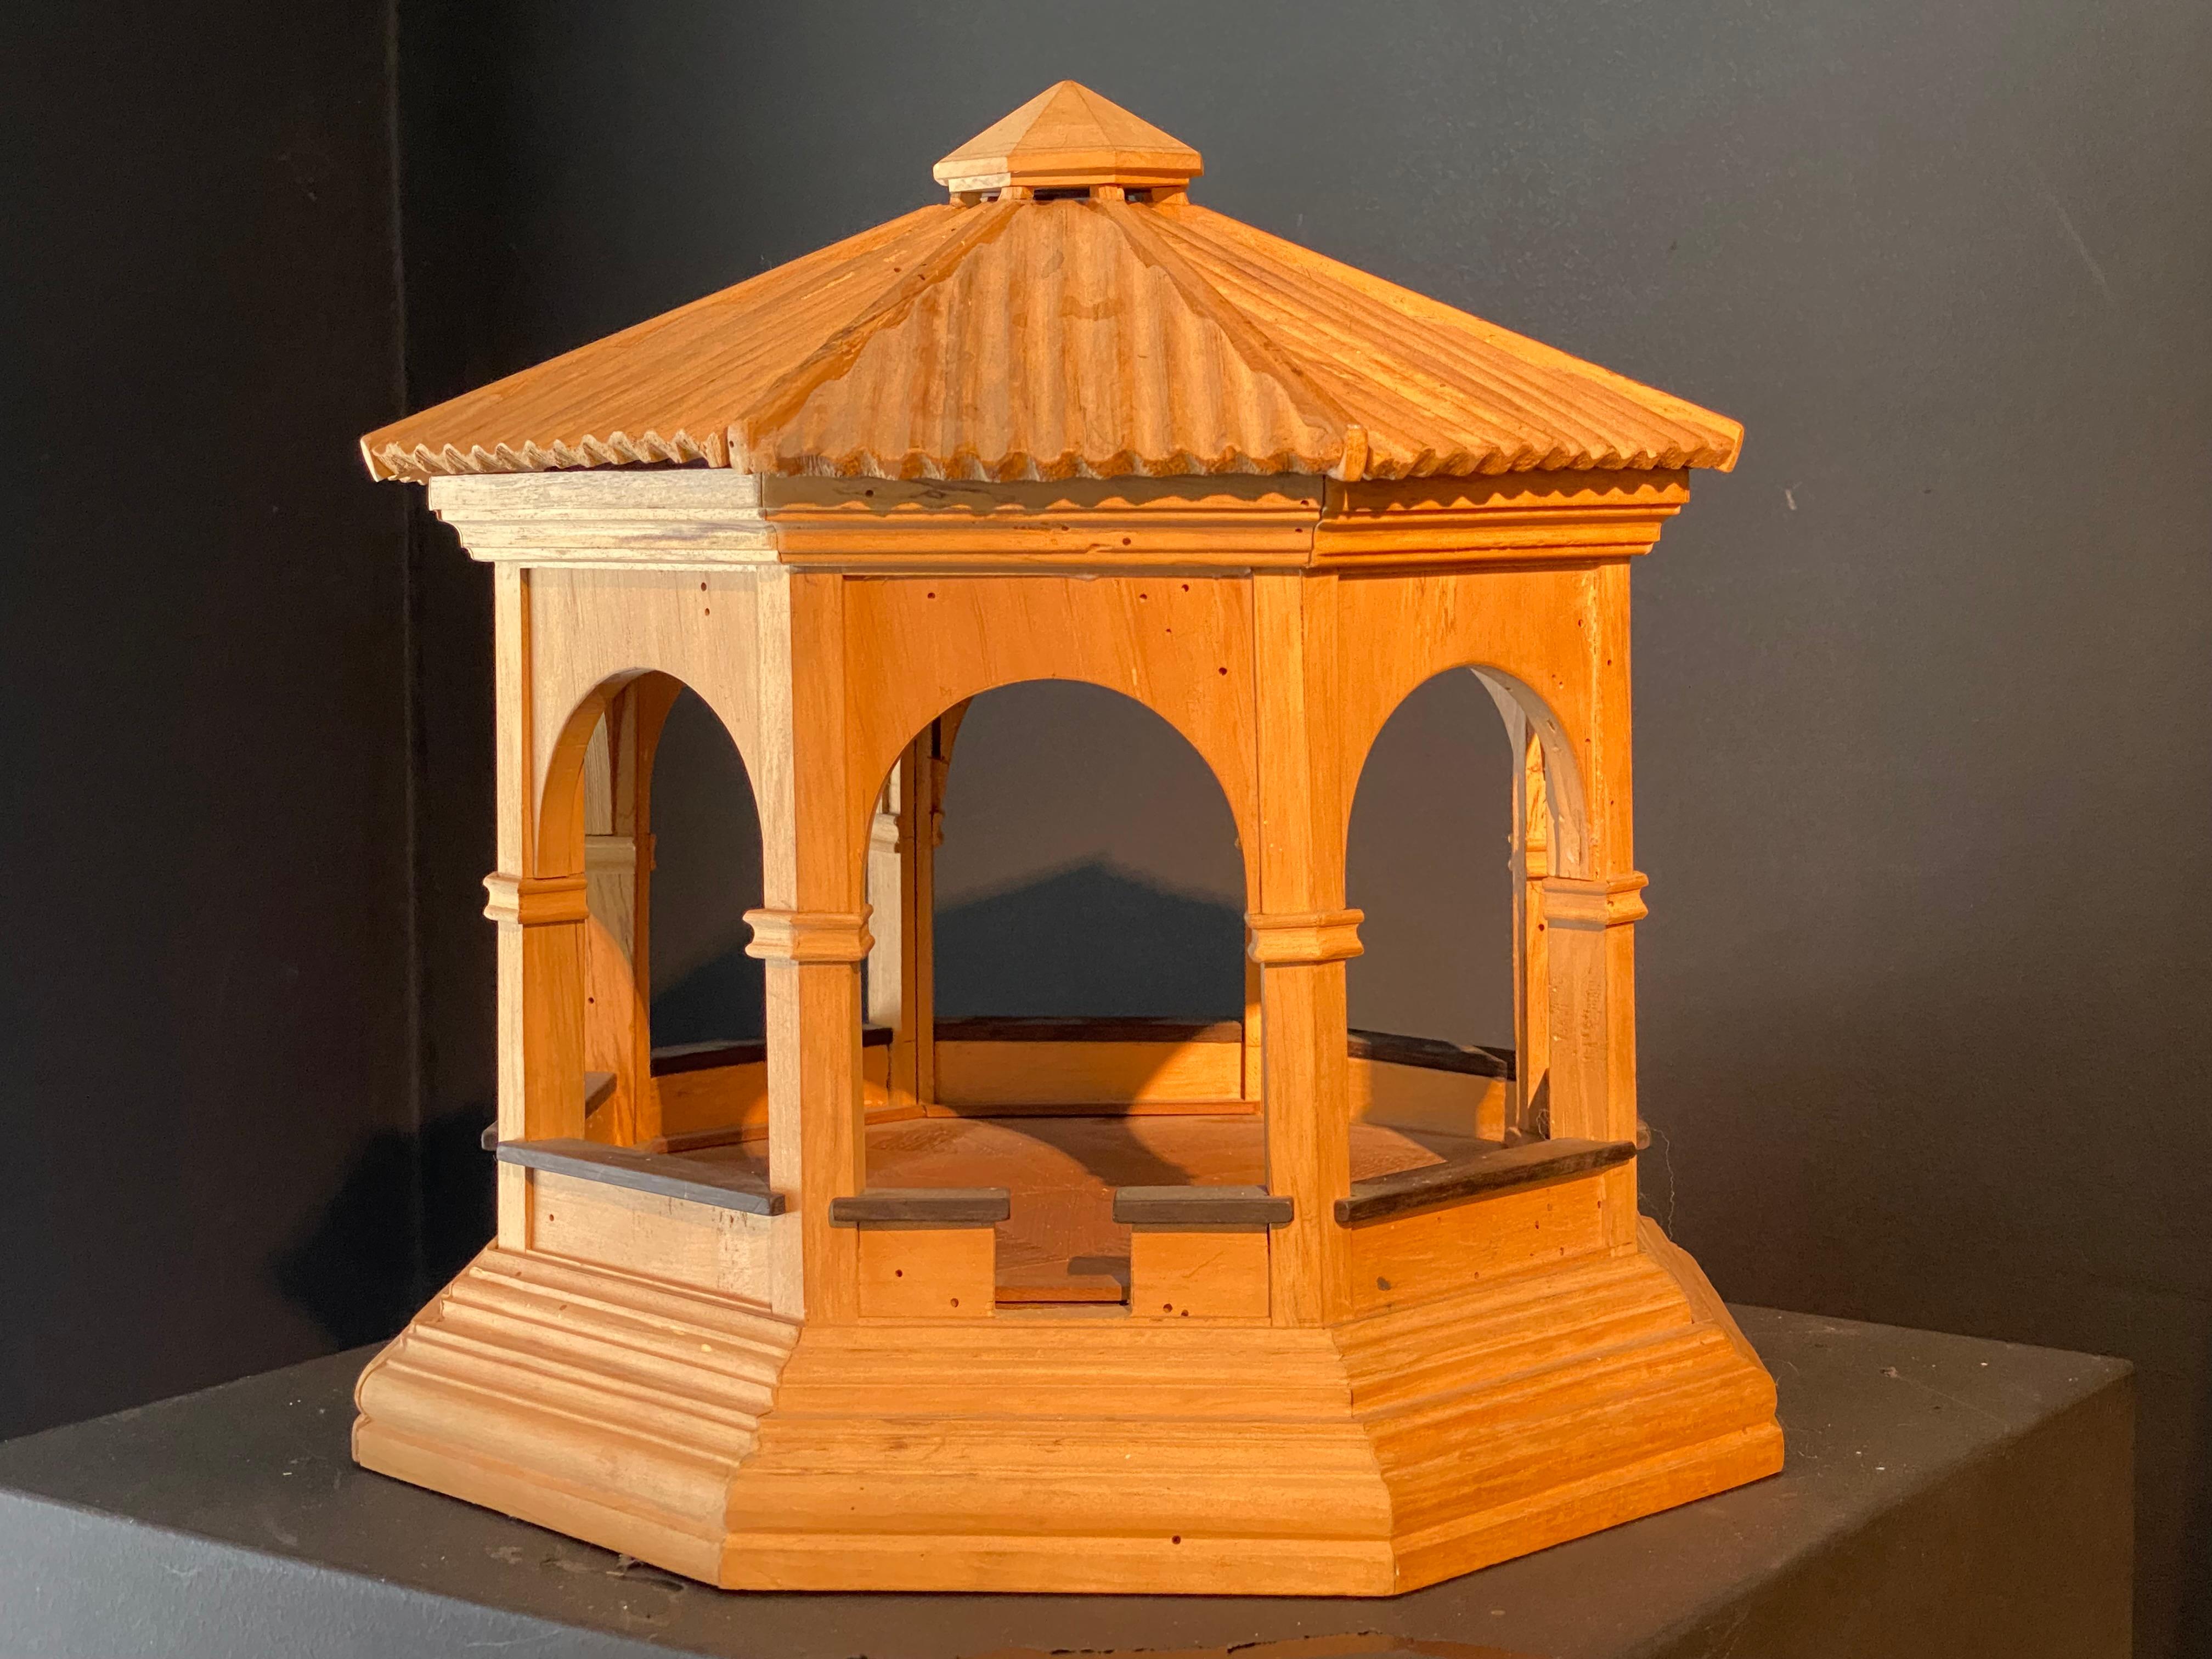 Small Wooden Vintage Architects Model of a Wooden Kiosk 1